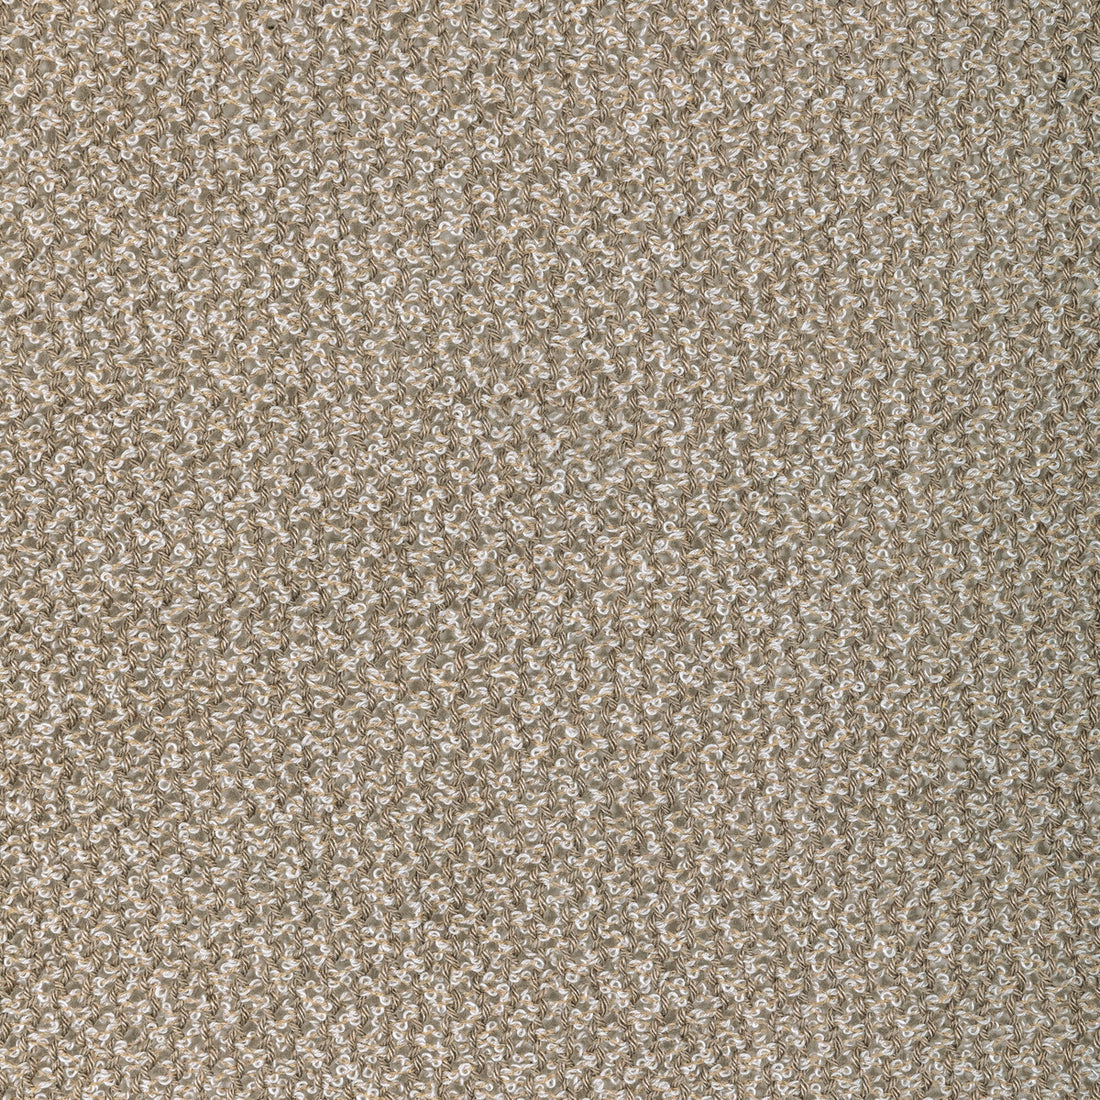 Pebbly fabric in barley color - pattern 4897.106.0 - by Kravet Couture in the Barbara Barry Ojai collection